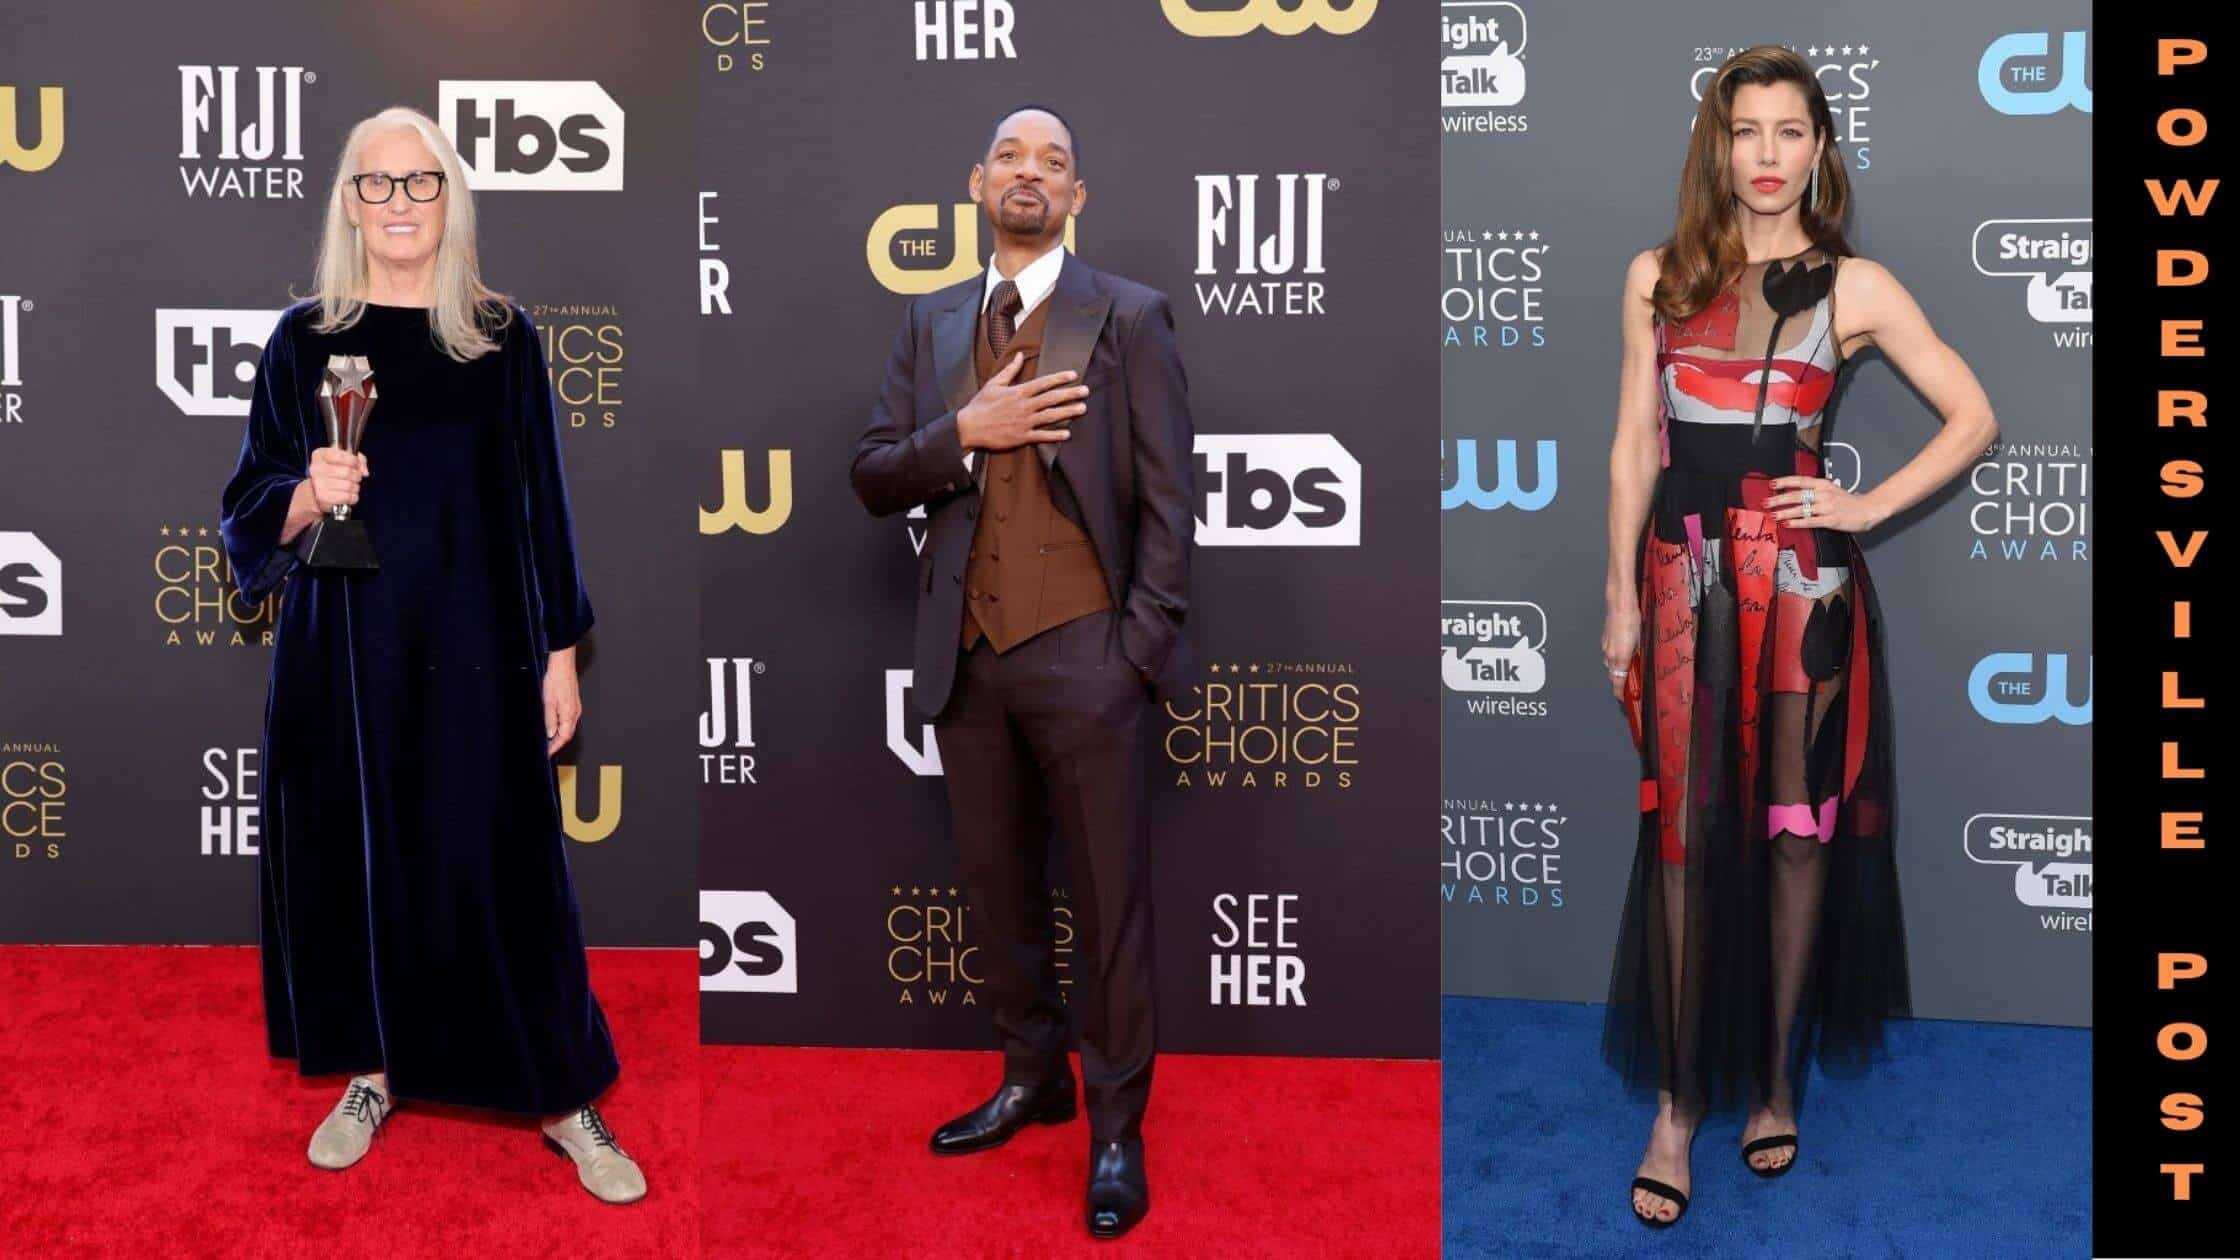 Critics' Choice Awards 2022 Full List Of Nominees And Winners